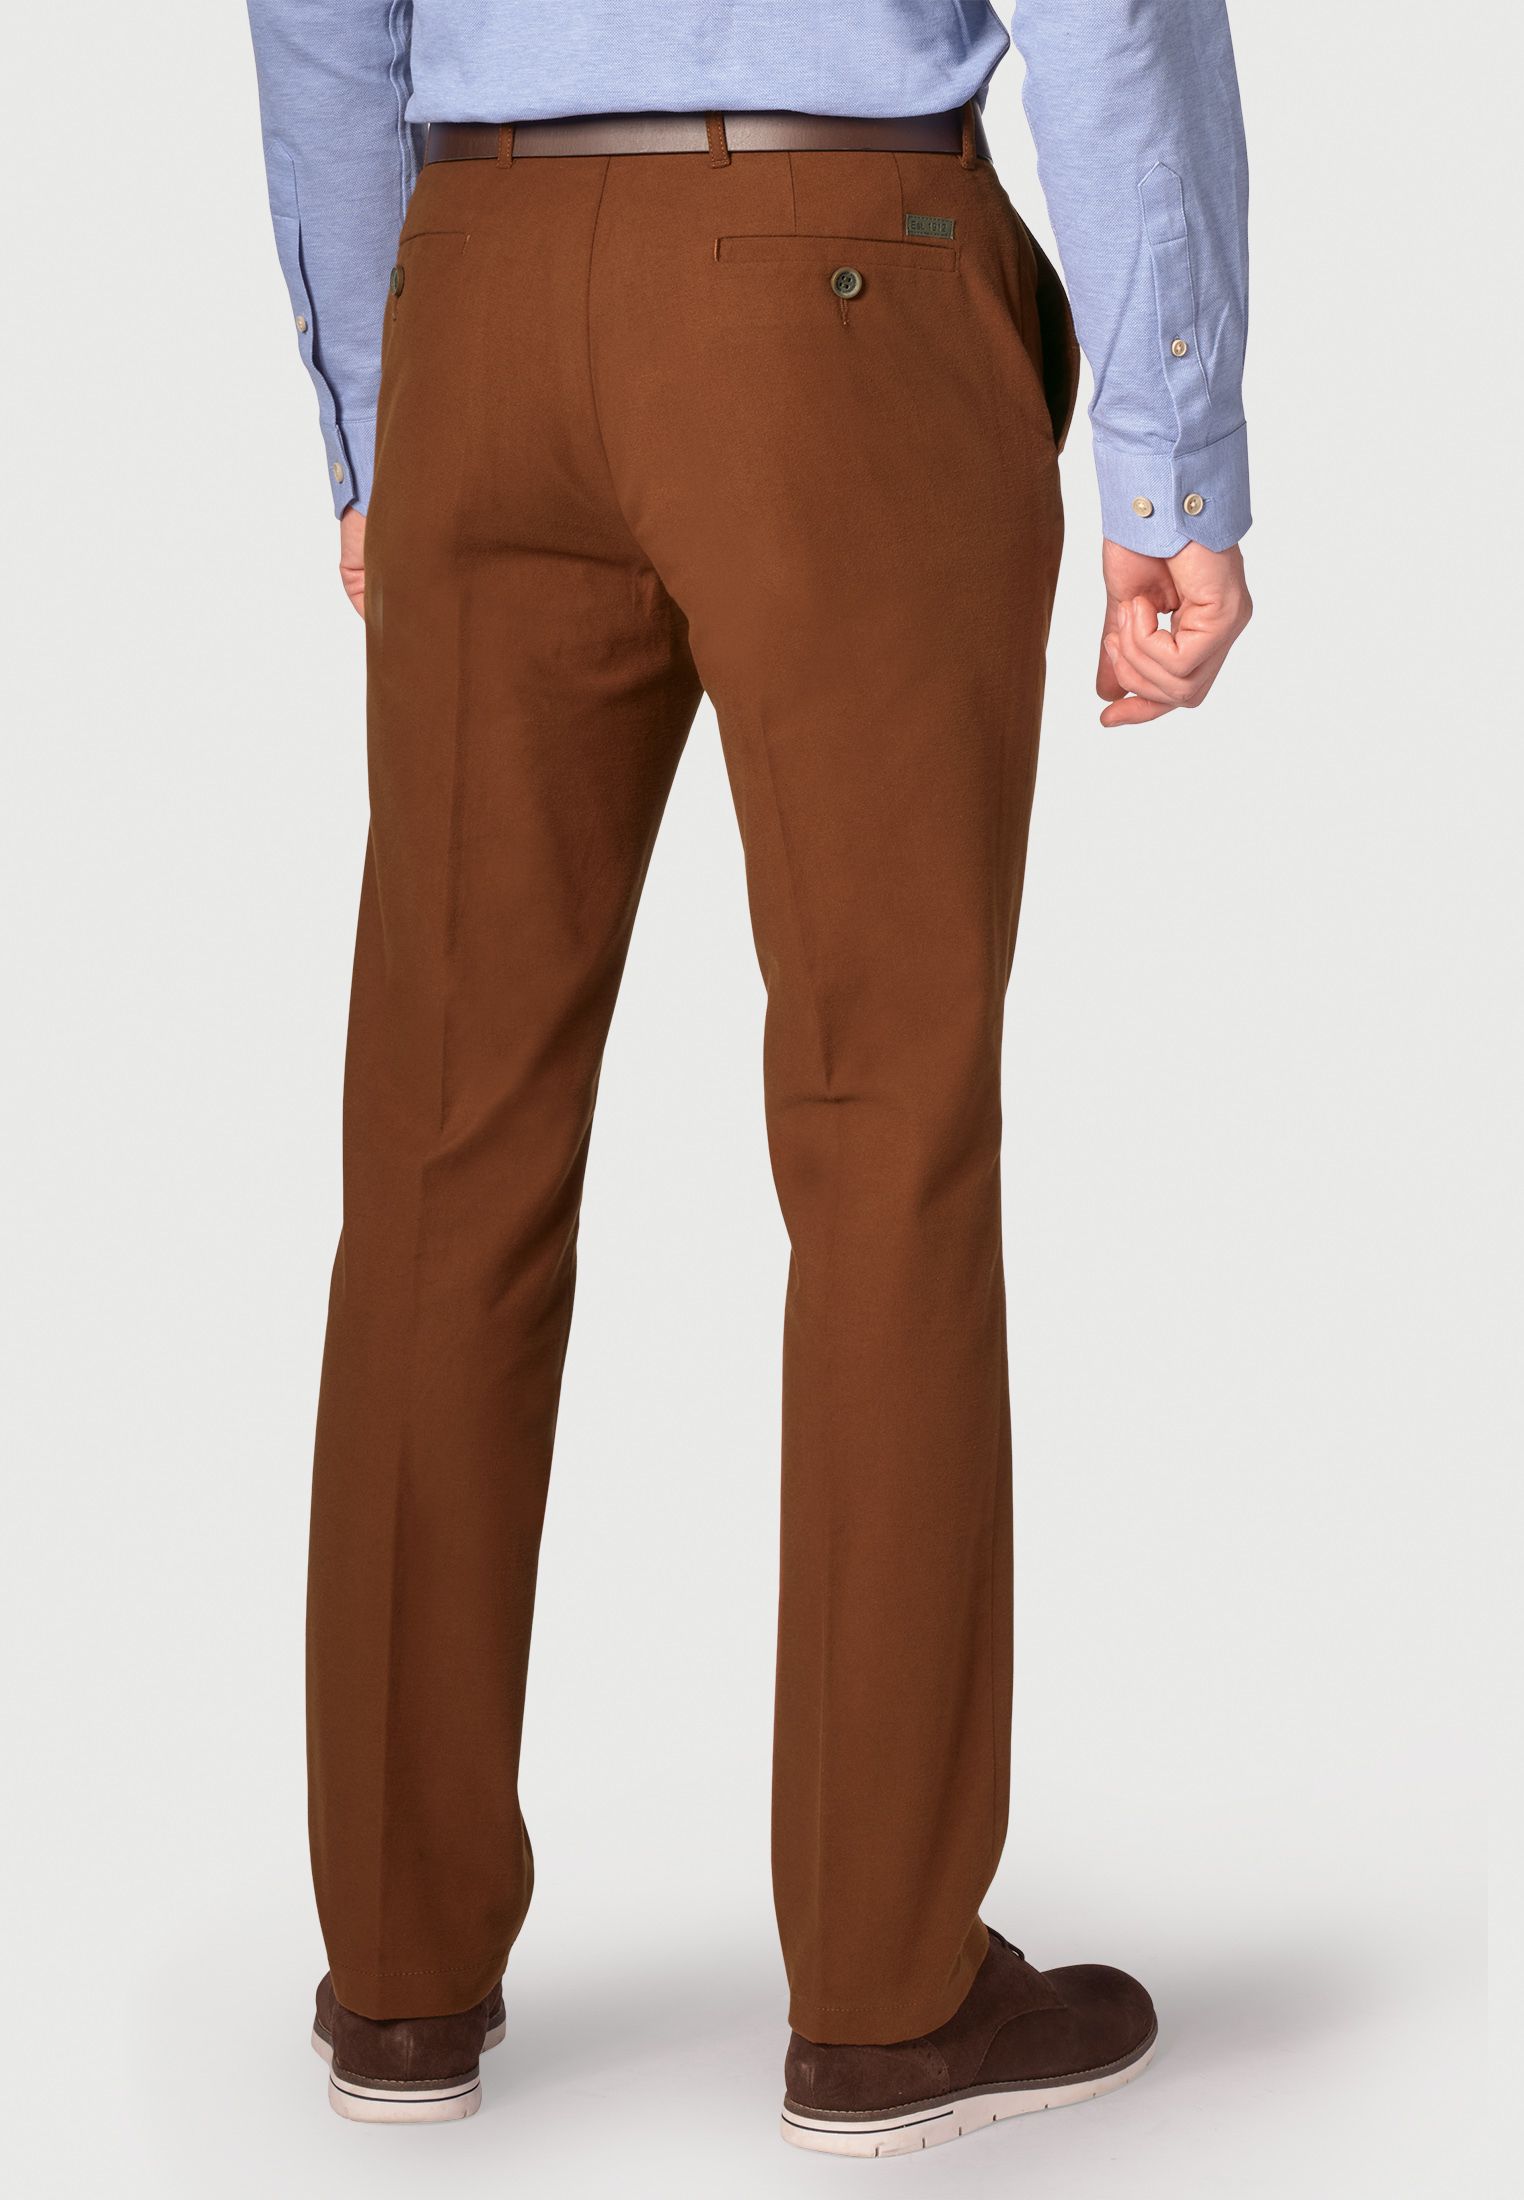 Kerswell Ginger Moleskin Classic Fit Pants